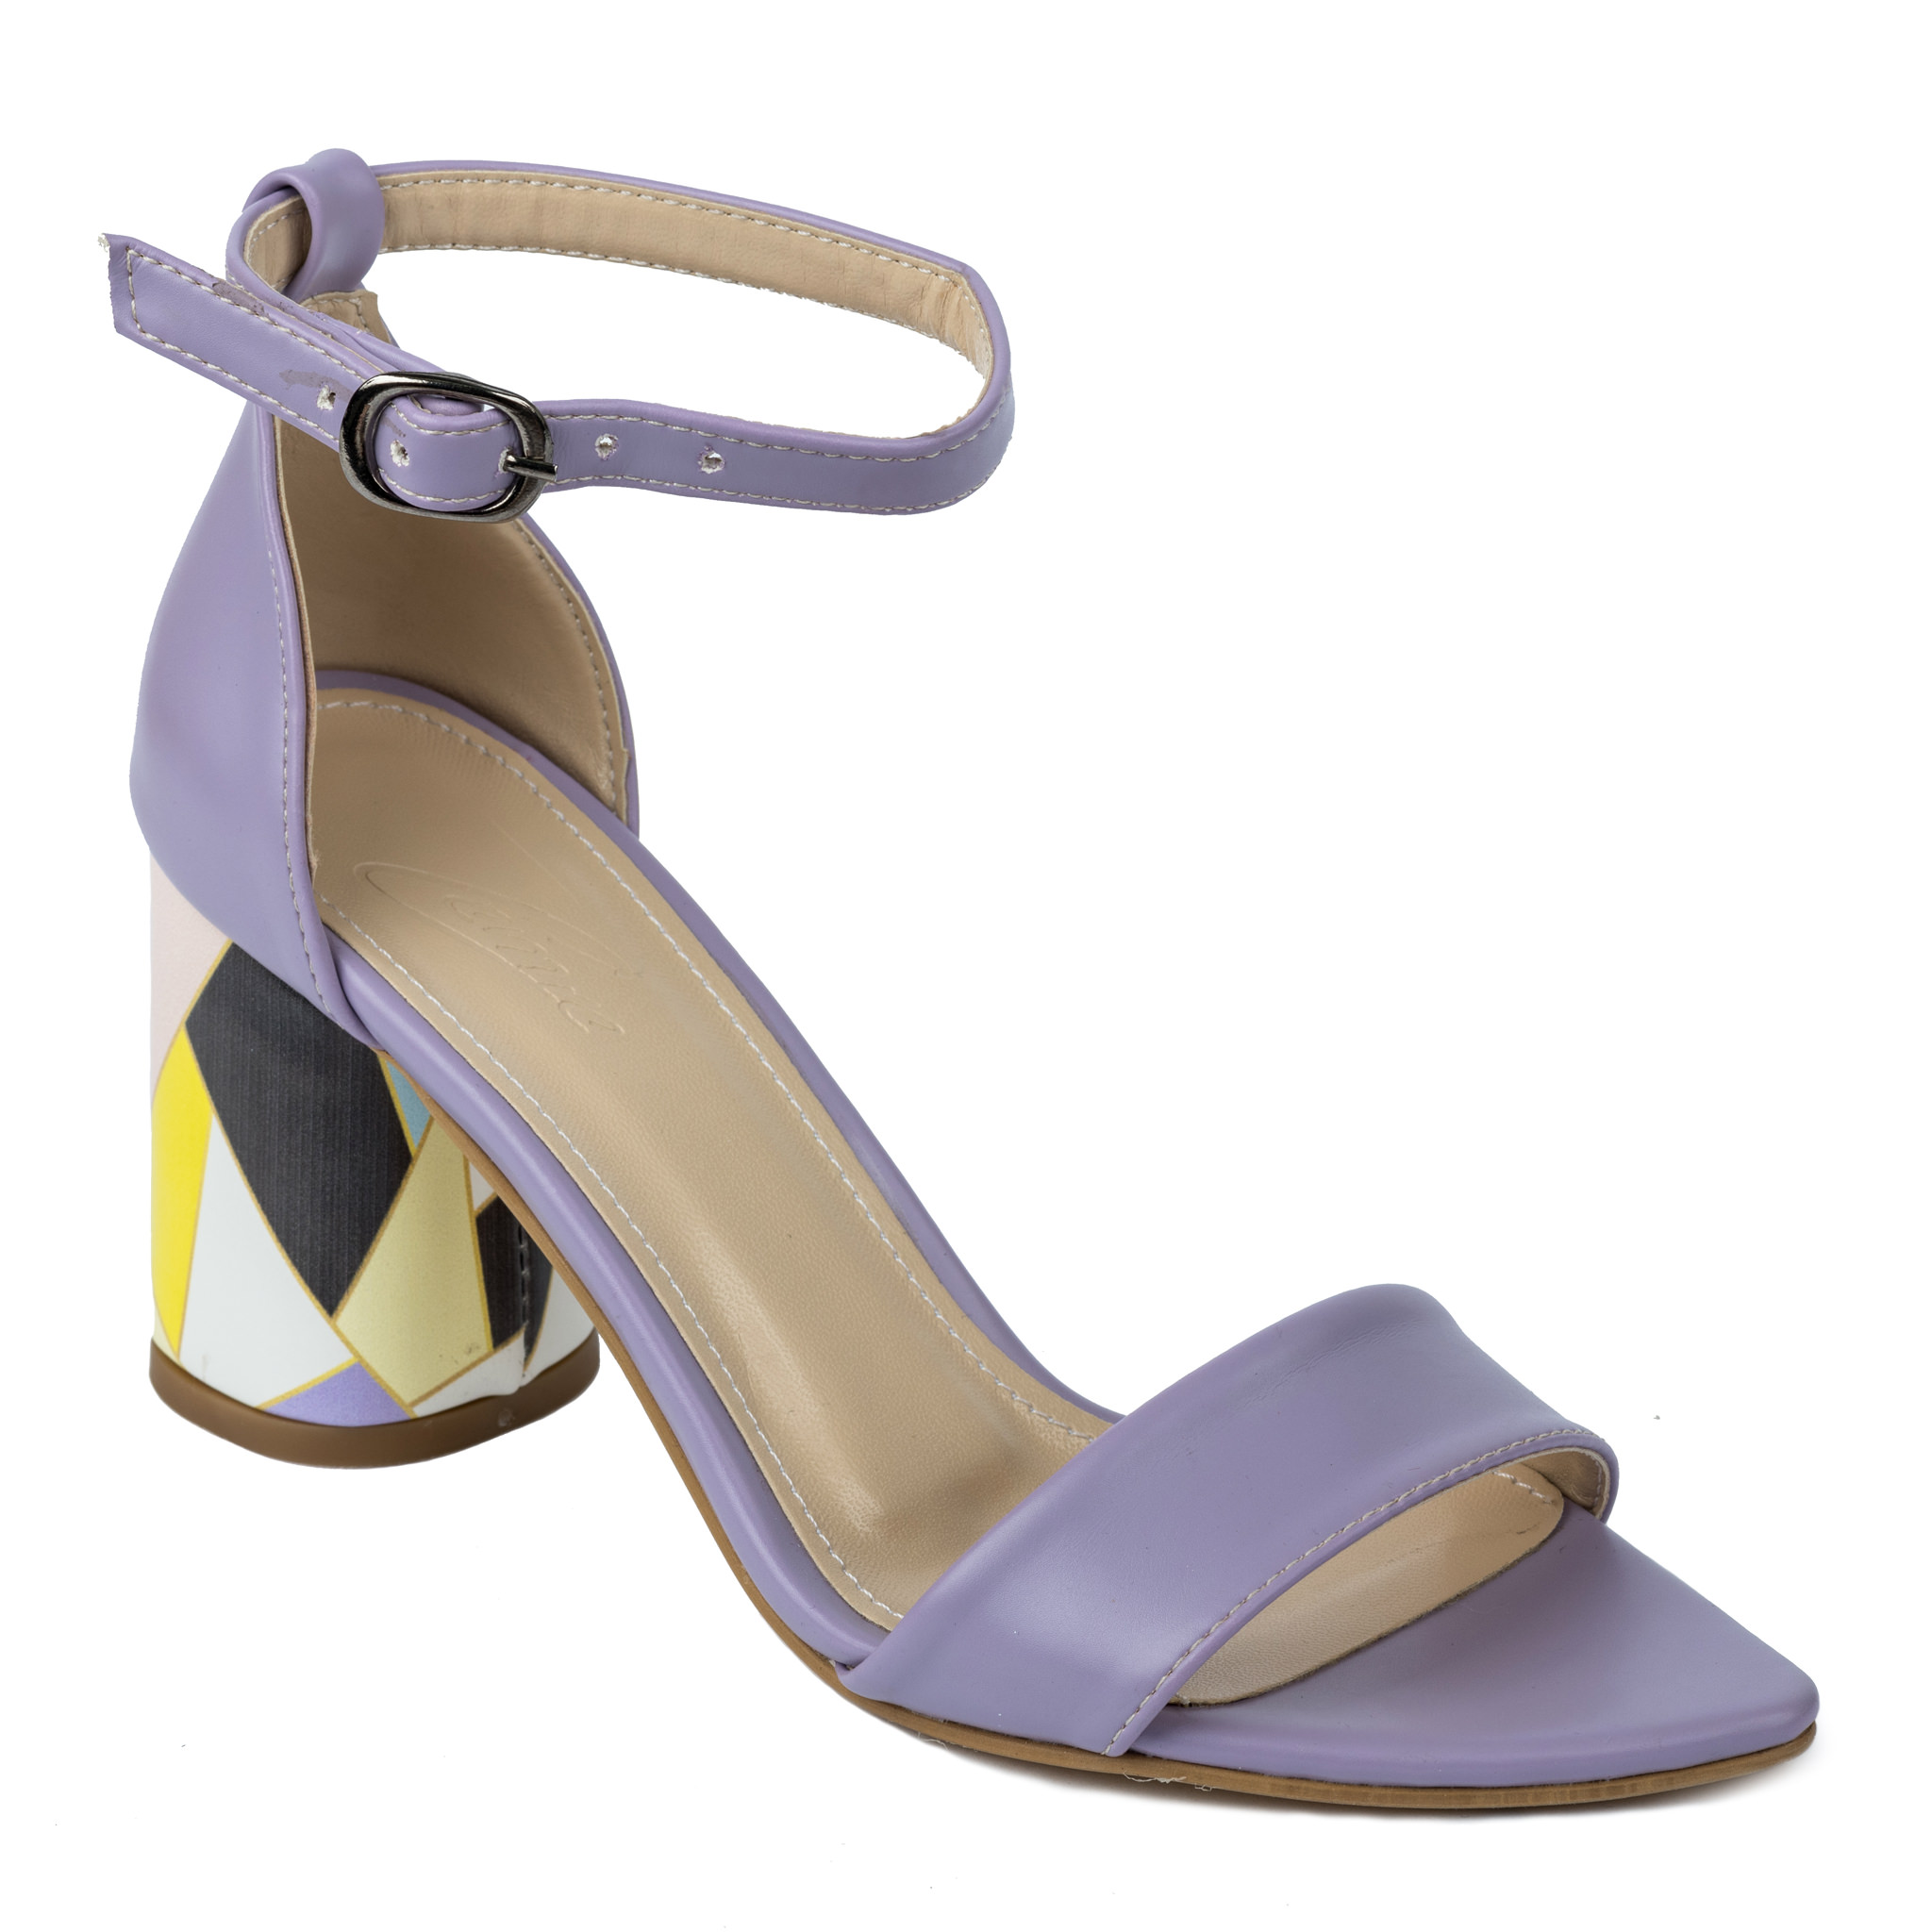 SANDALS WITH COLORFUL BLOCK HEEL - PURPLE